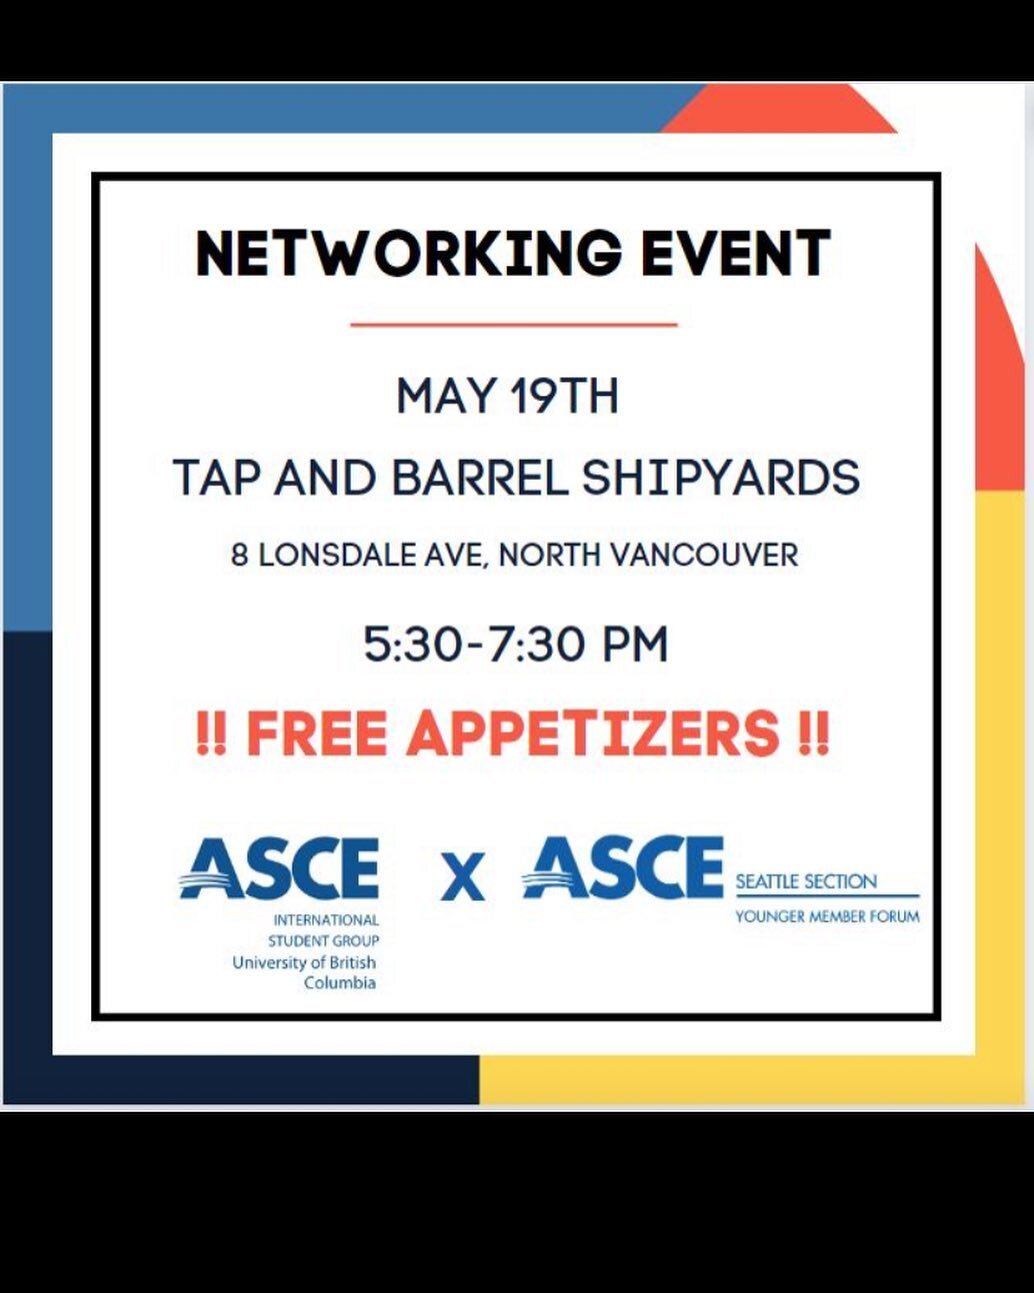 Hello Young Civil Engineering Professionals!

Please join the American Society of Civil Engineers (ASCE) Seattle Section Younger Member Forum (YMF) and University of British Columbia (UBC) ASCE for our first ever Joint Networking Event!!

ASCE will b